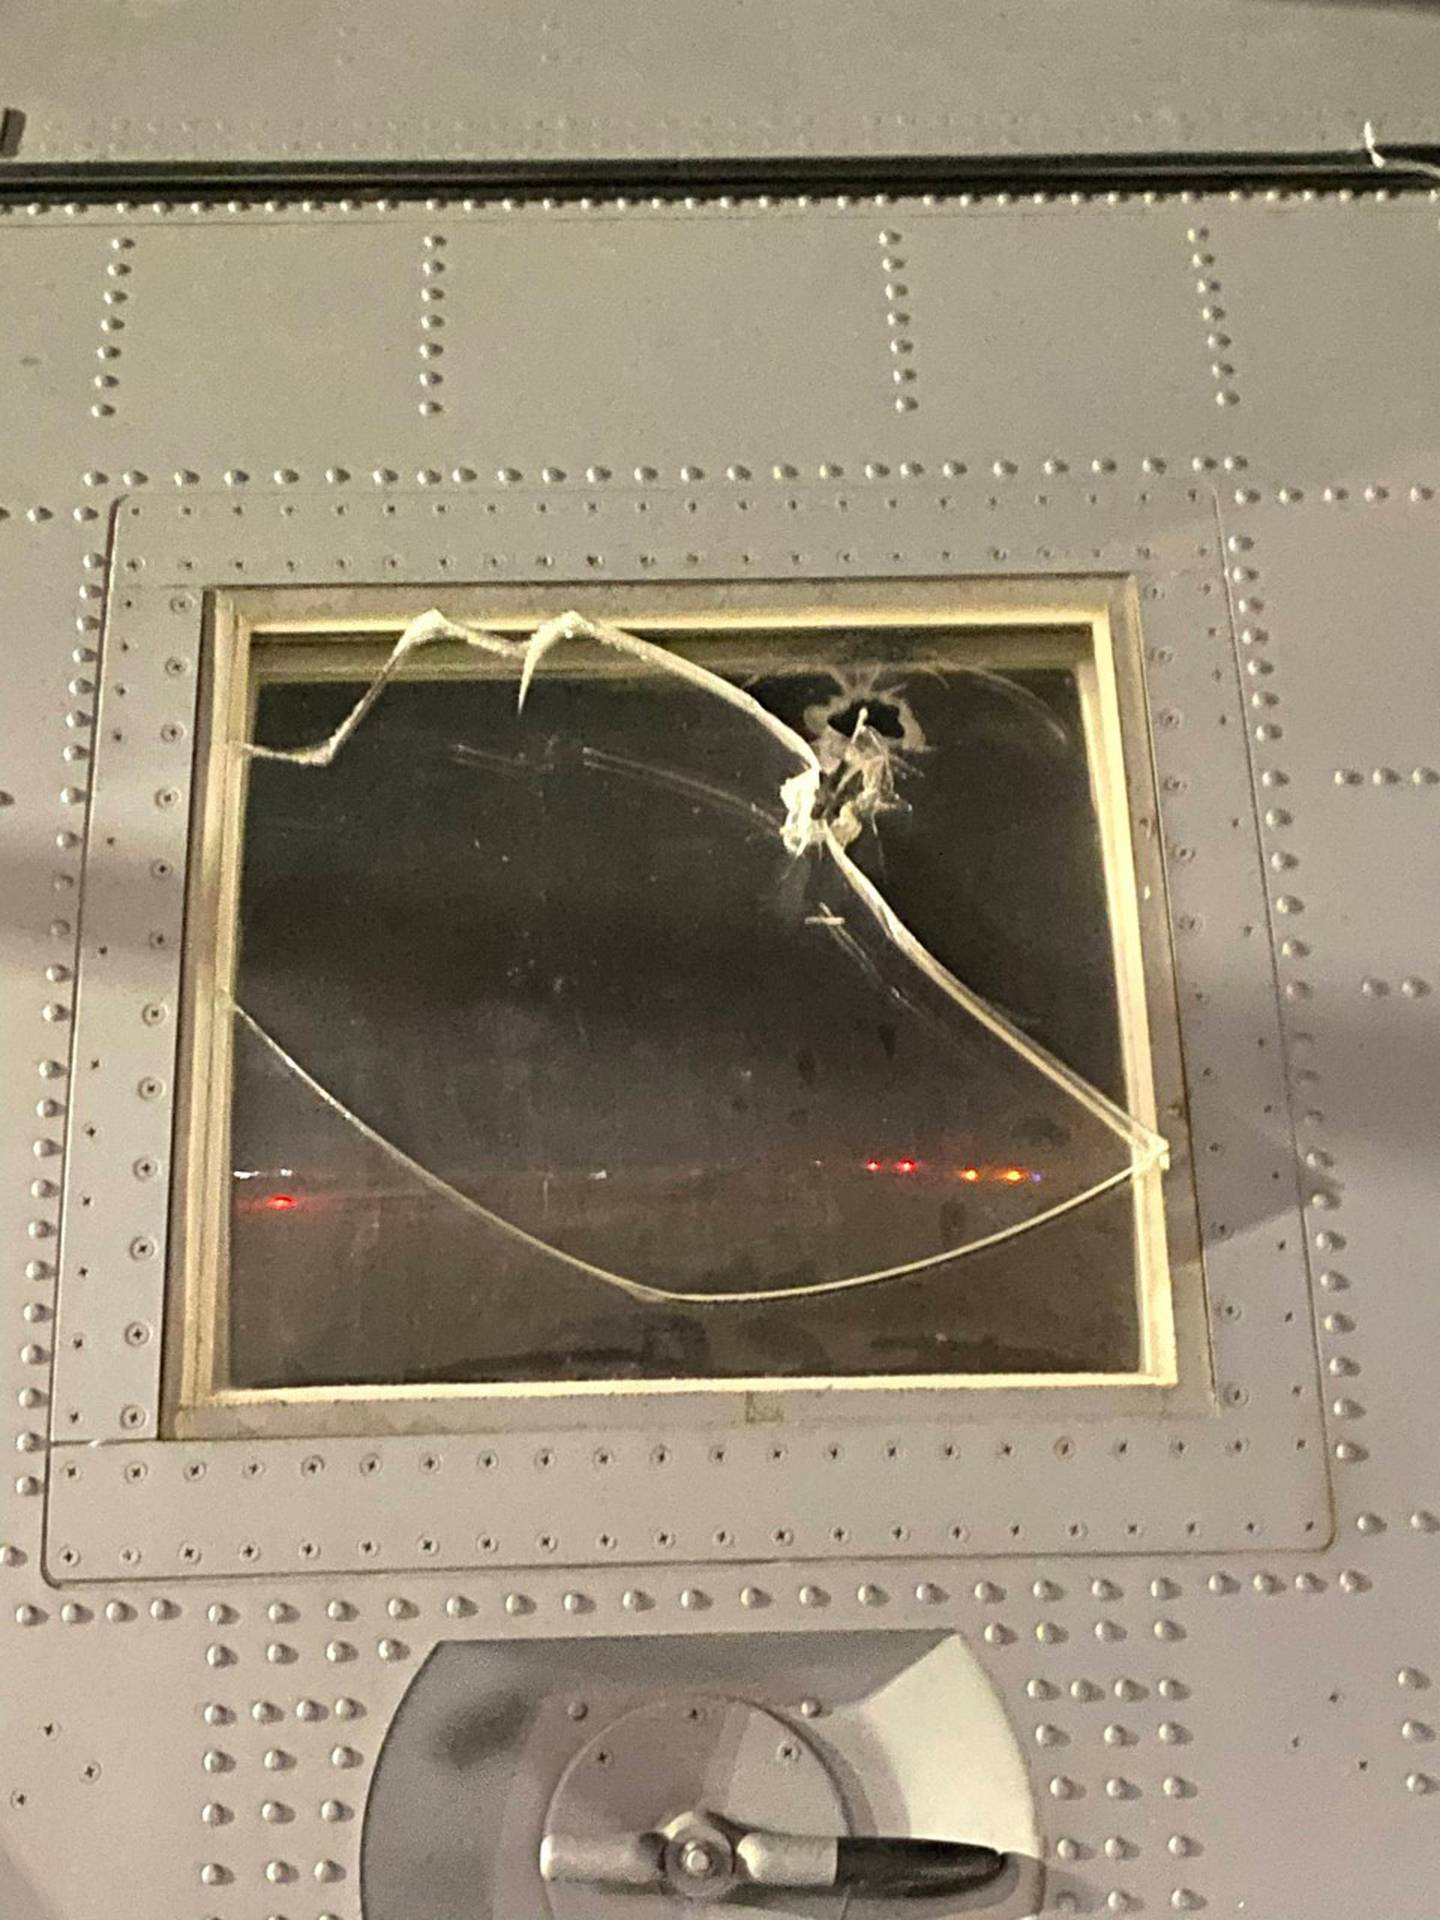 Enemy fire broke a window on a C-130J Super Hercules airlift plane, injuring Staff Sgt. Jade Morin, during a mission in Afghanistan on Sept. 19, 2020. (Photo courtesy of Staff Sgt. Jade Morin)